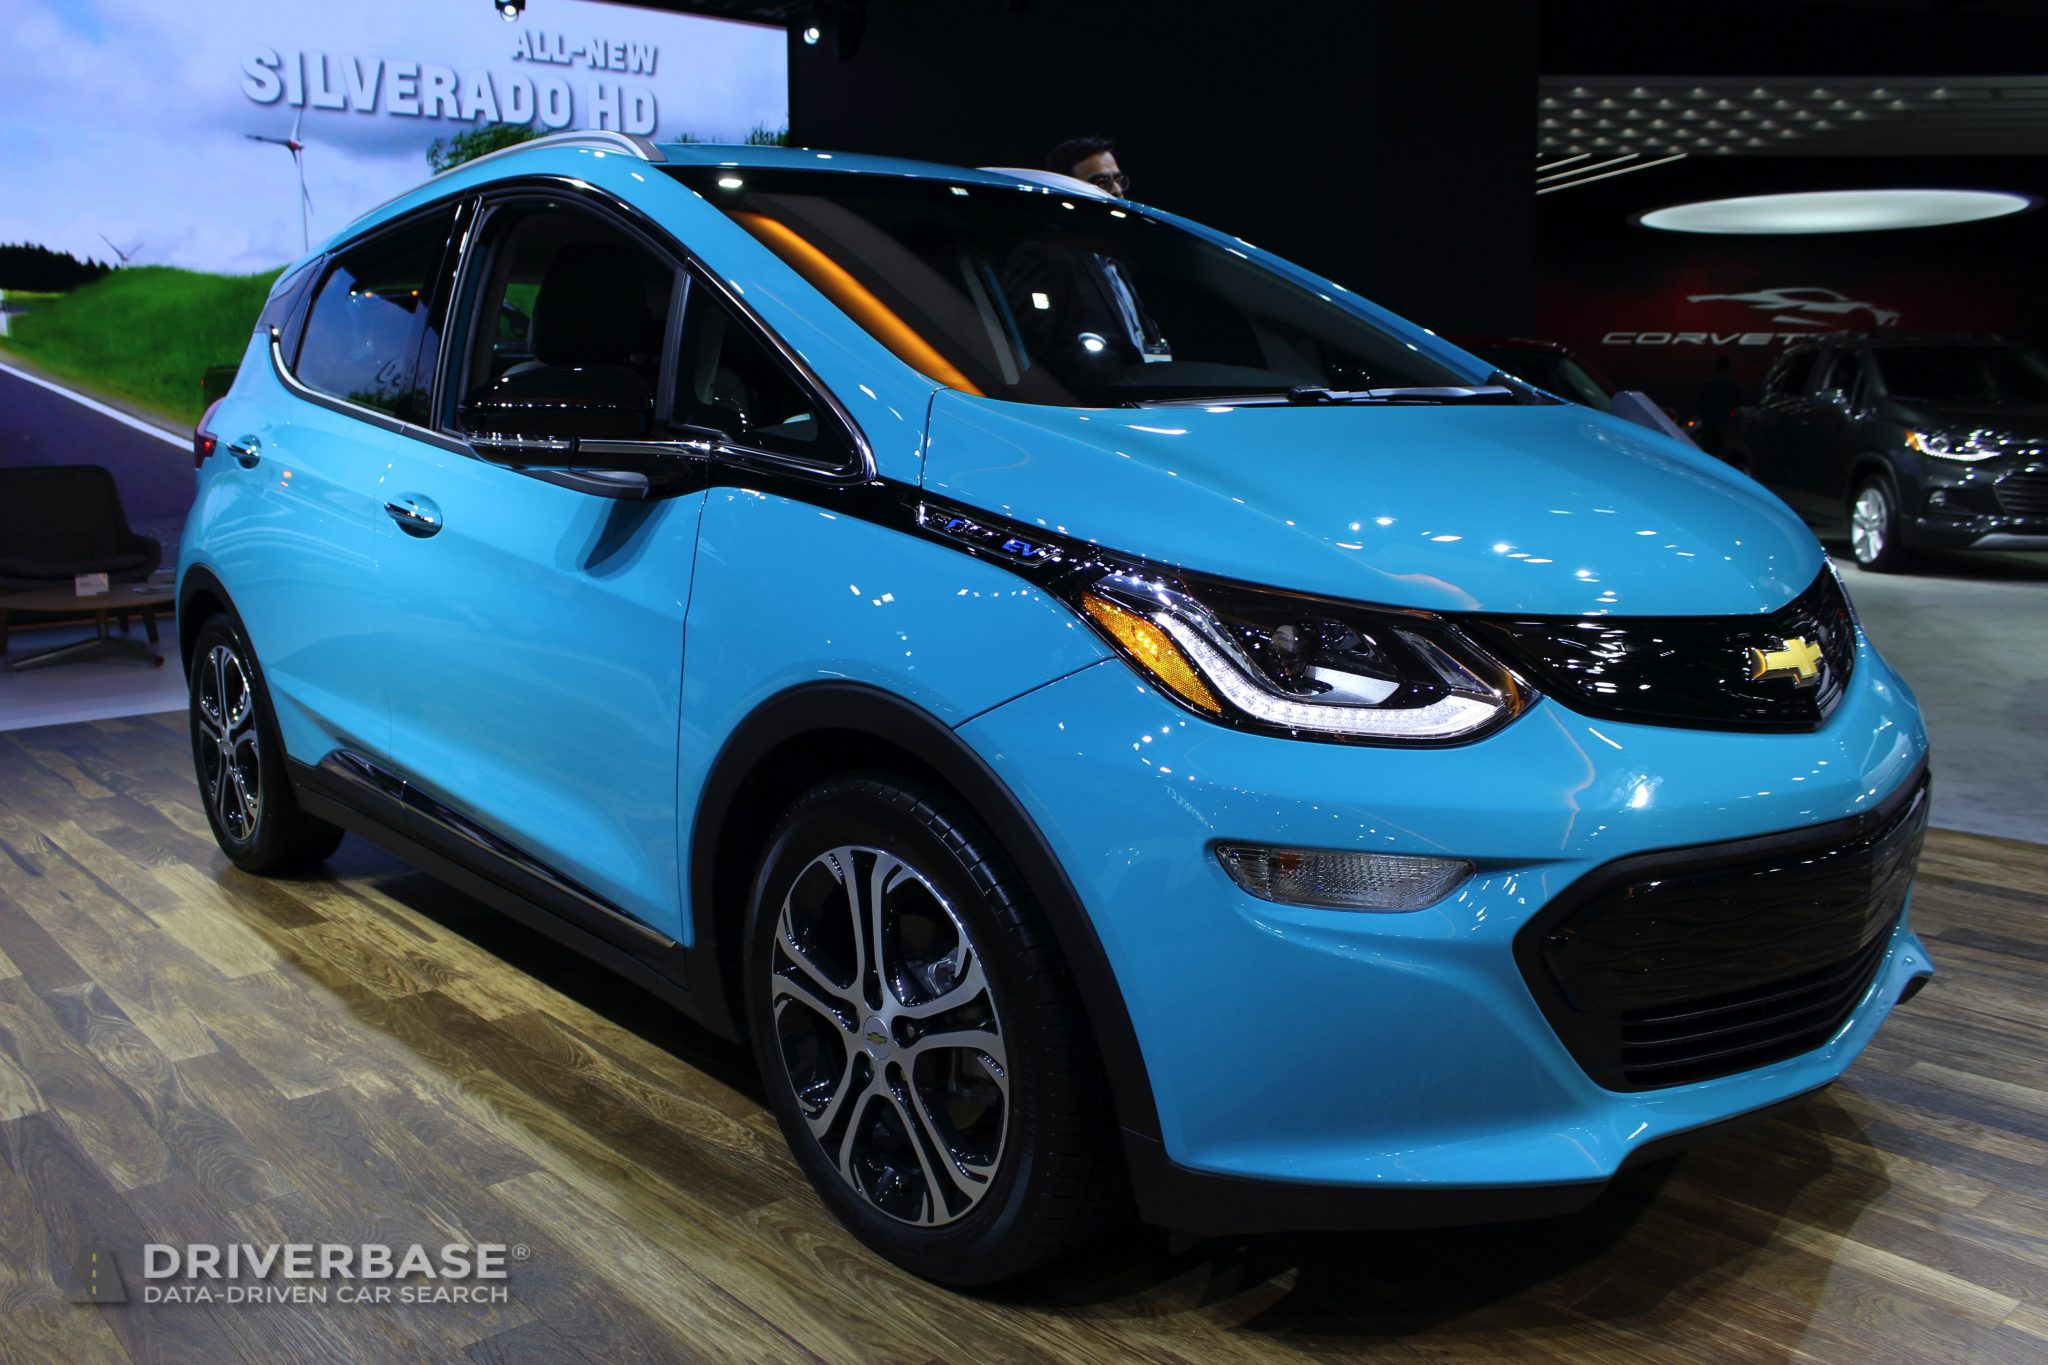 2020 Chevrolet Bolt at the 2019 Los Angeles Auto Show